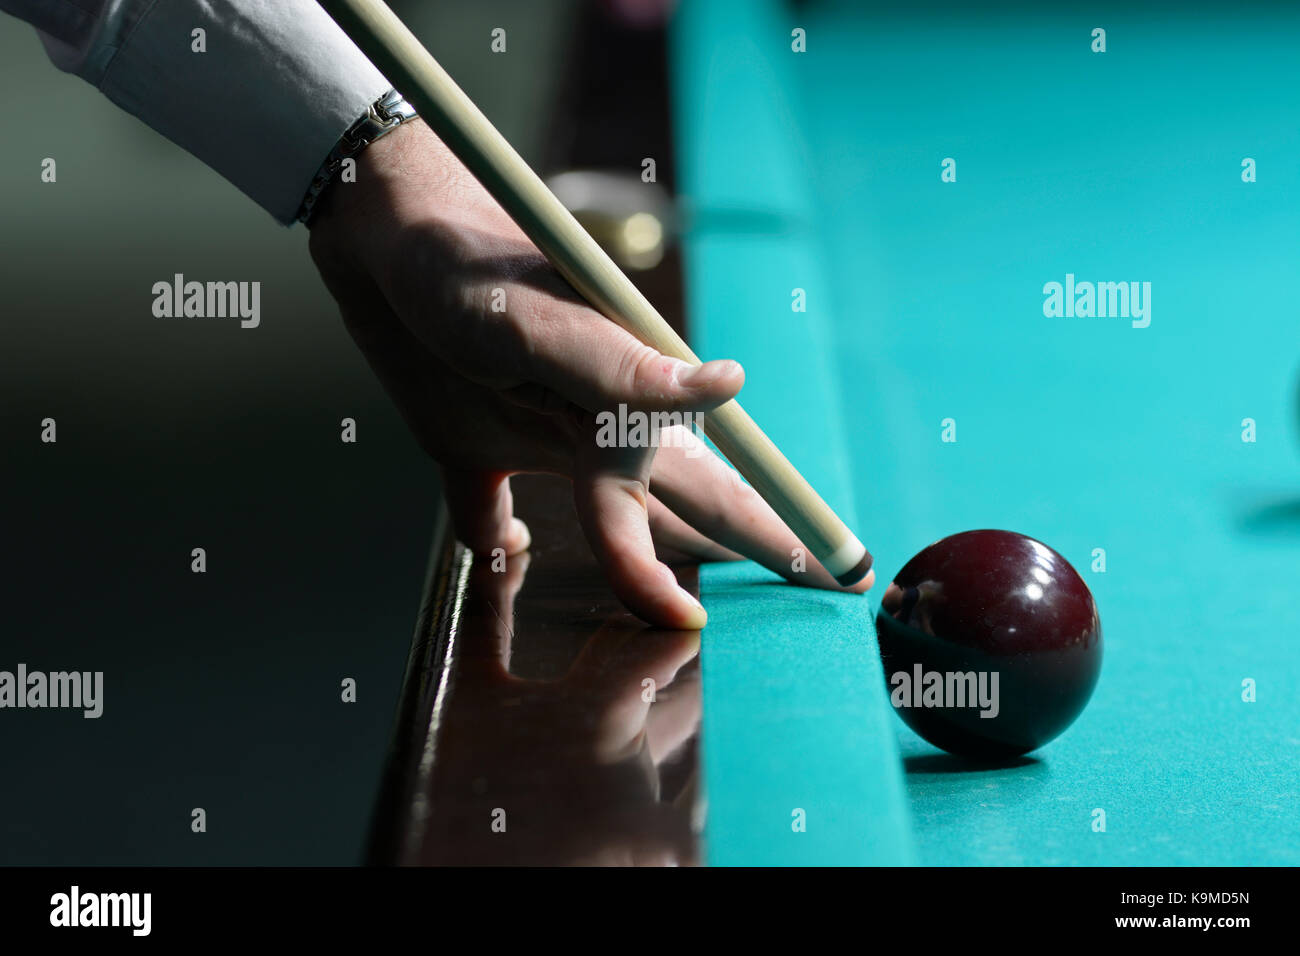 A player's arm with a cue on a pool table ready to stroke a ball Stock Photo